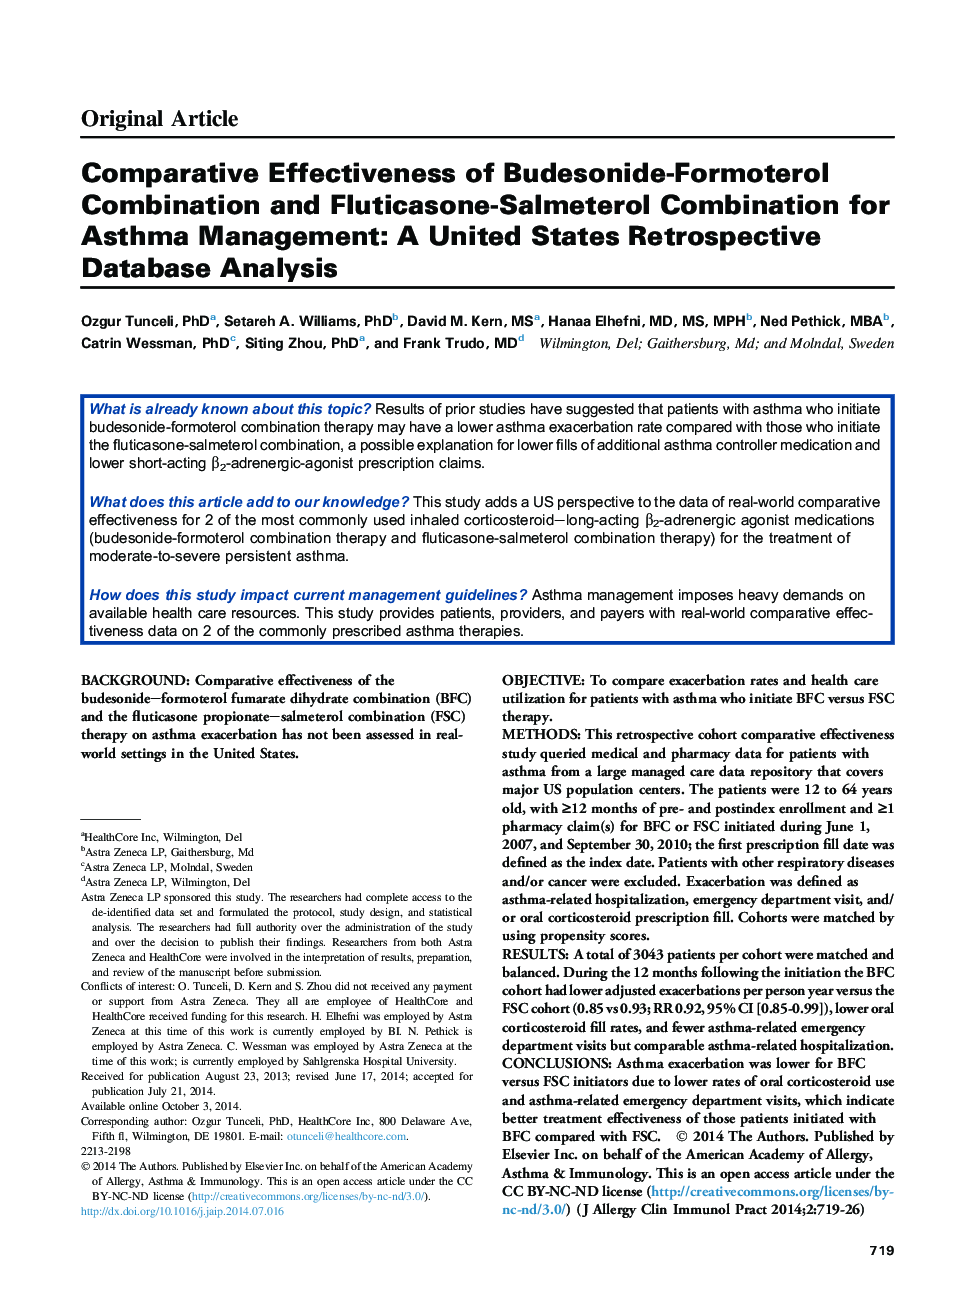 Comparative Effectiveness of Budesonide-Formoterol Combination and Fluticasone-Salmeterol Combination for Asthma Management: A United States Retrospective Database Analysis